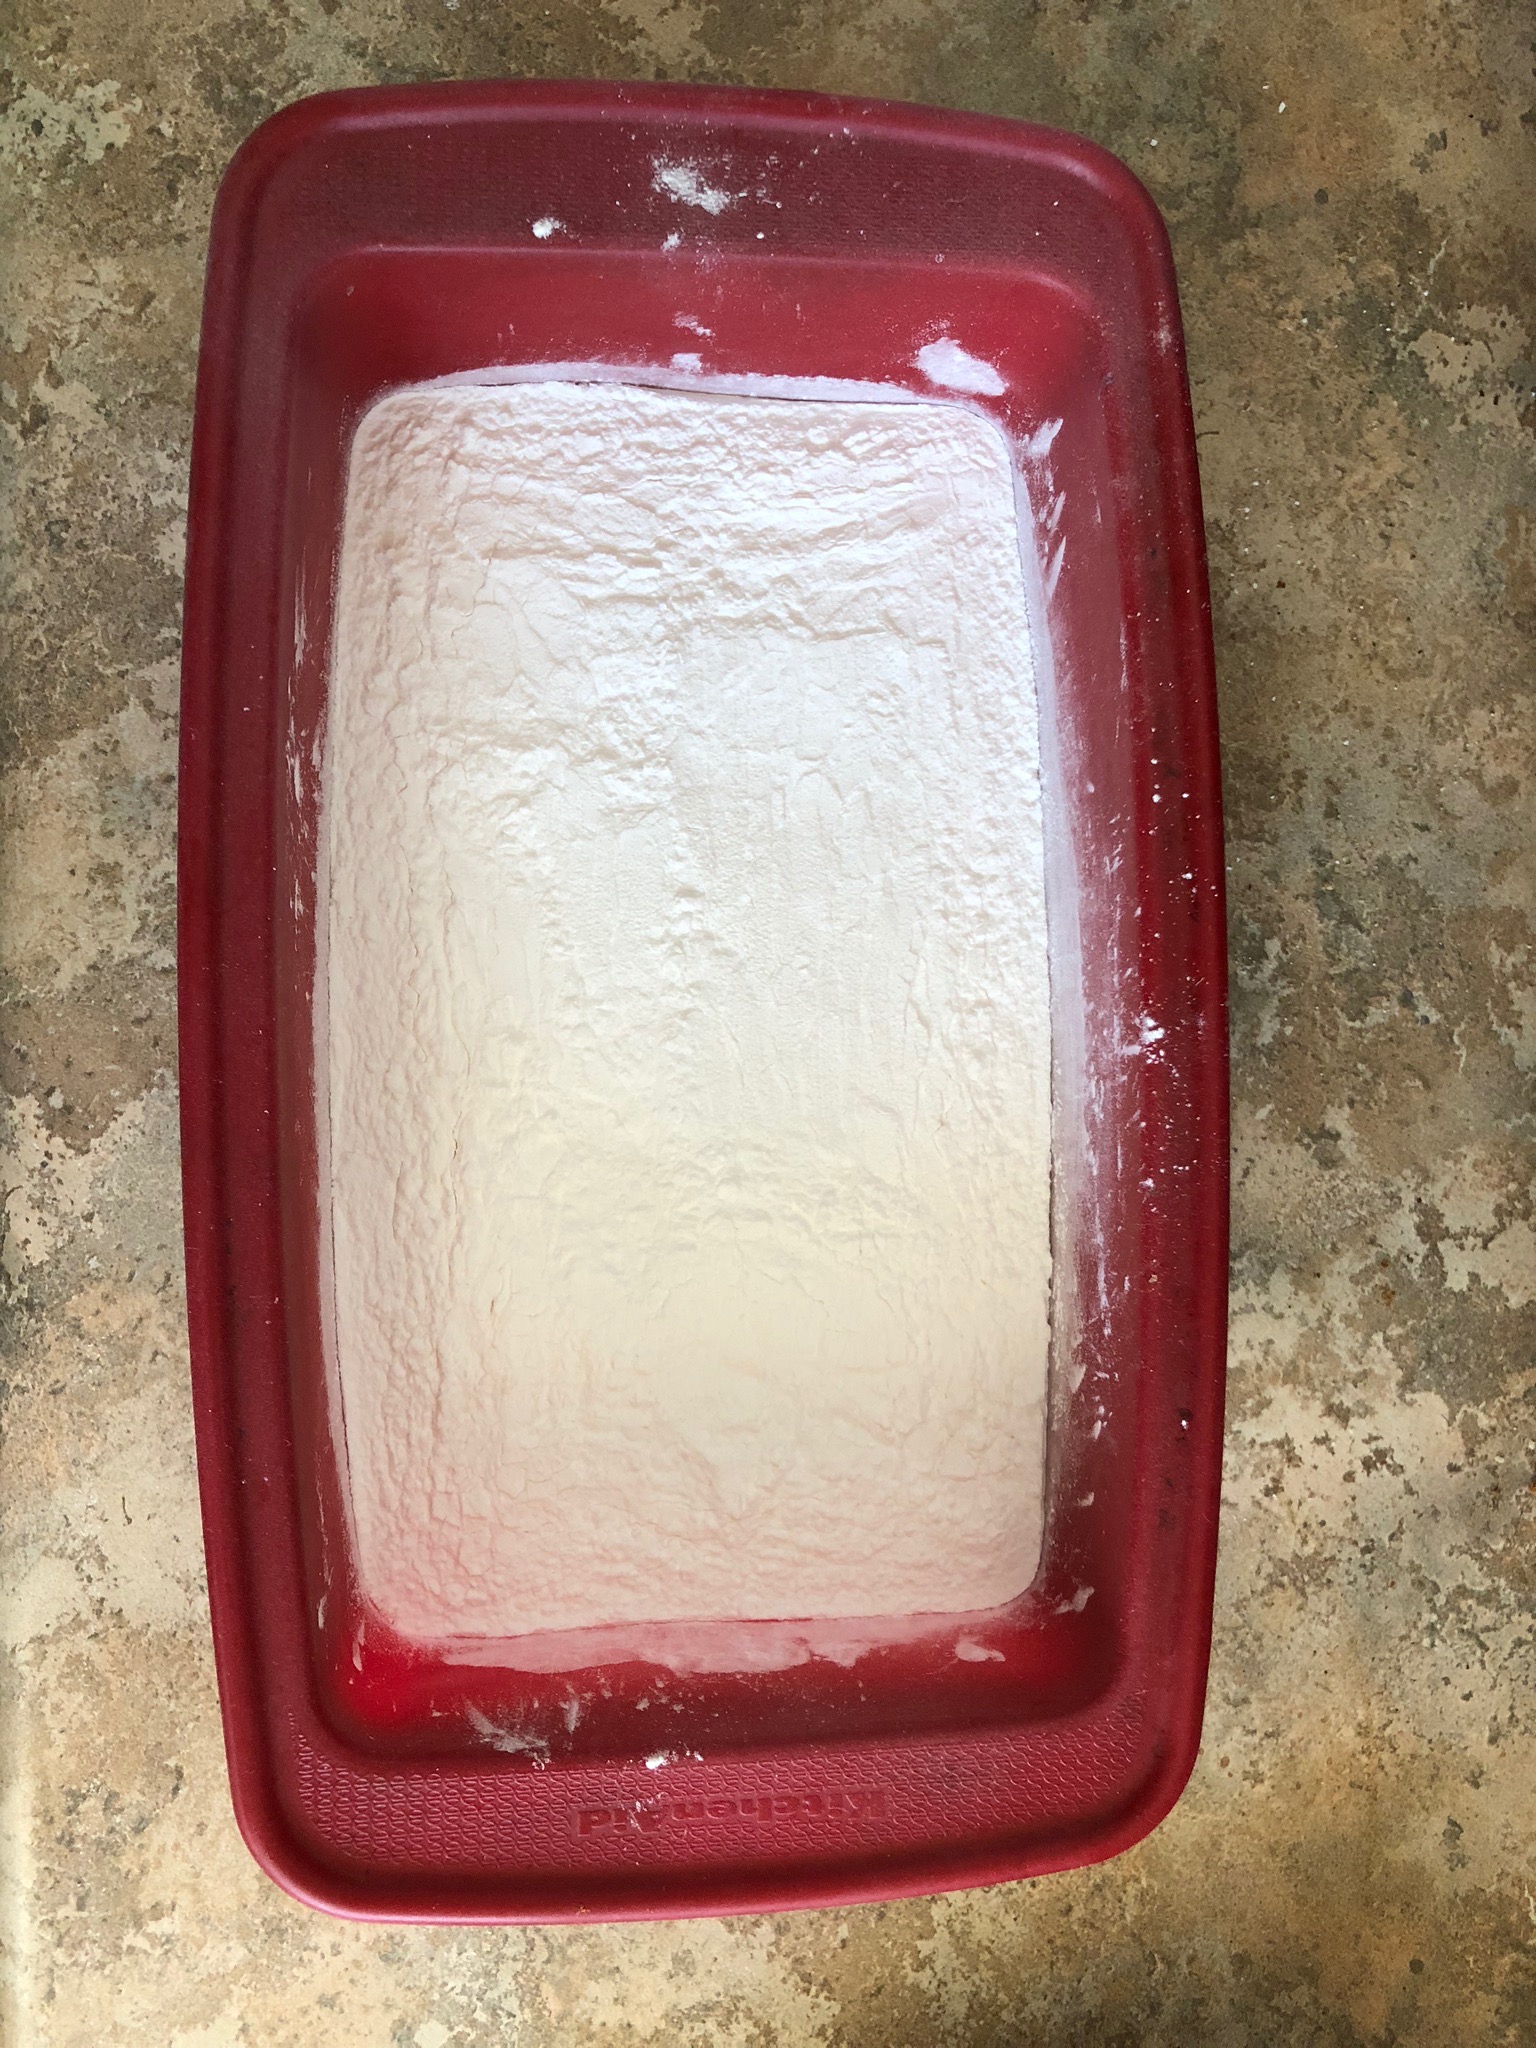 A silicone bread pan filled with flour